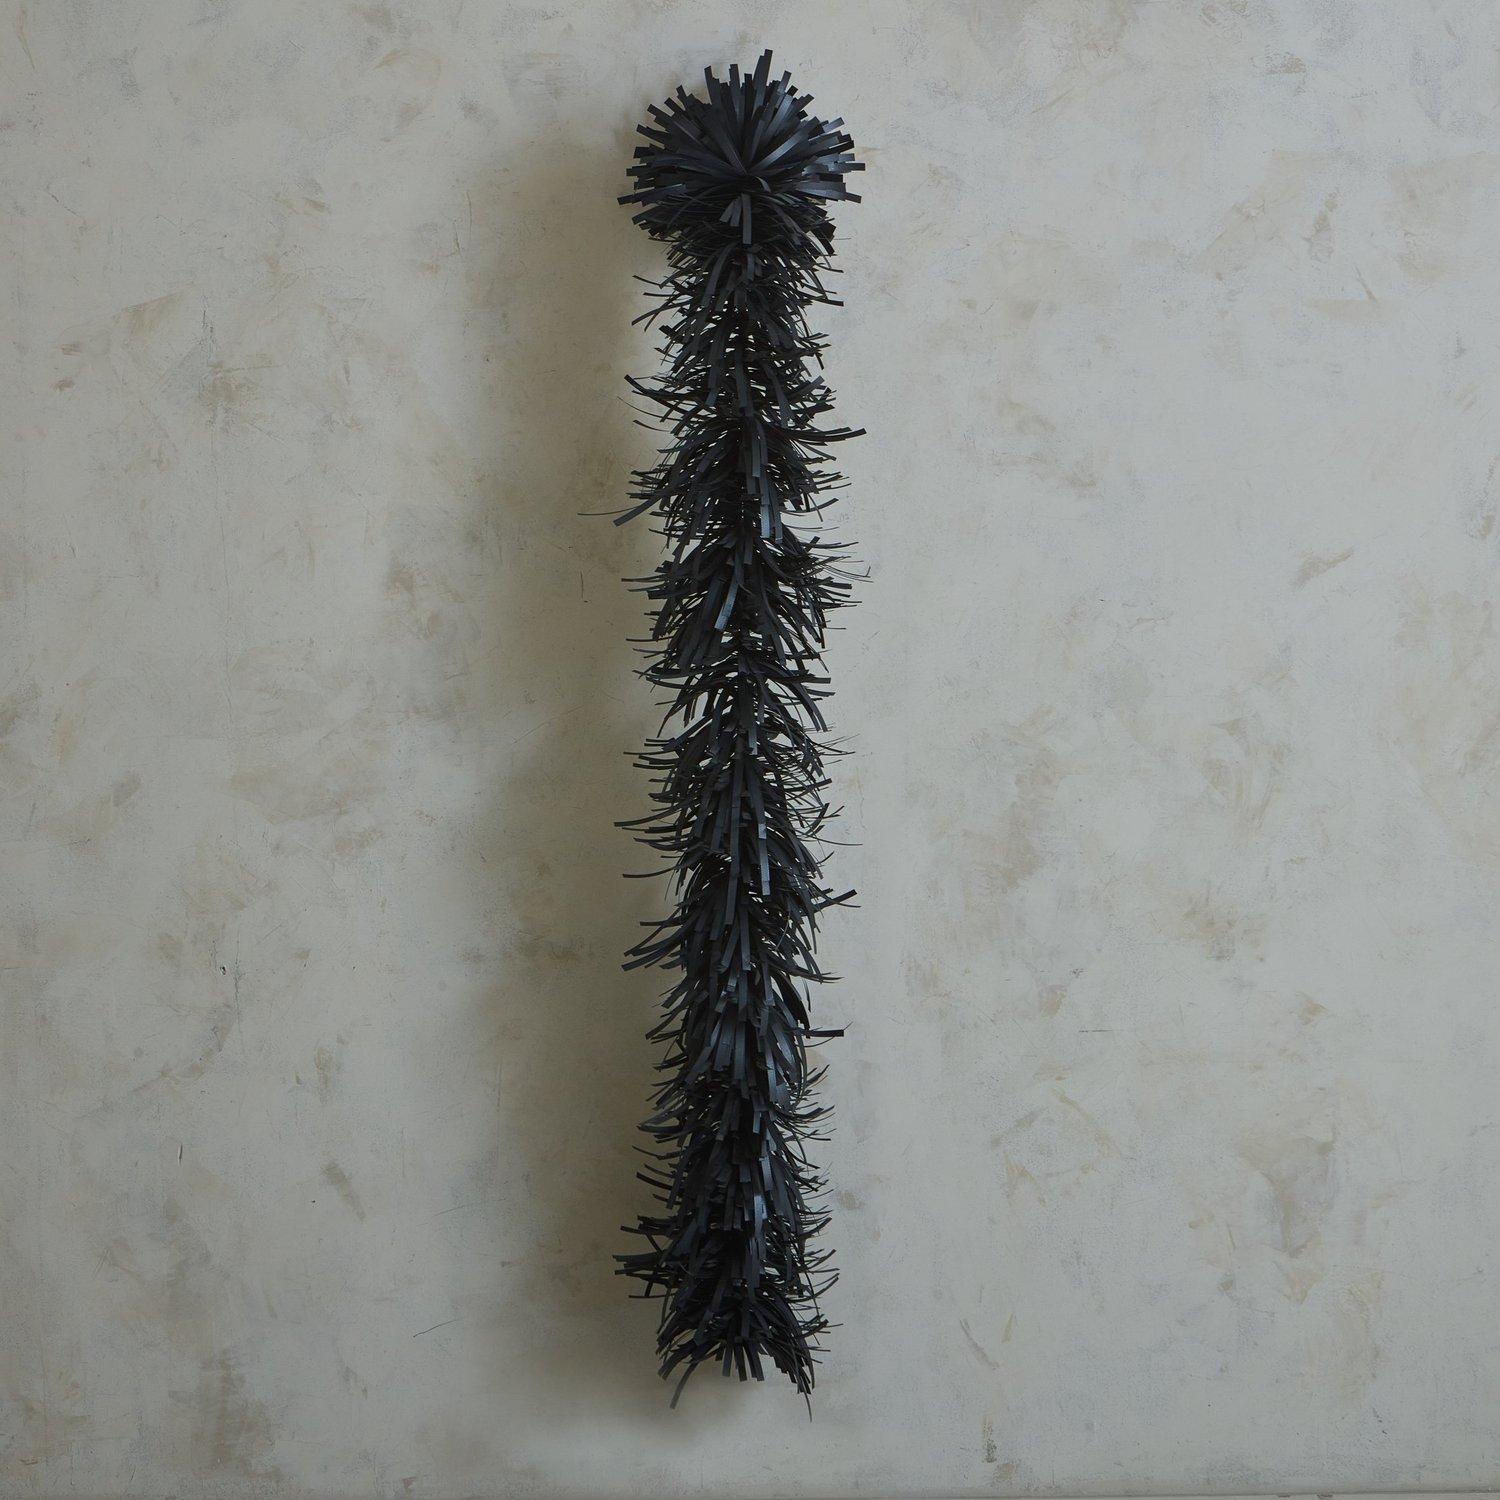 A textural wall sculpture made with black polypropylene straps which sprout from a tubular steel frame. This sculpture affixes to the wall and includes hanging hardware.

Erin Vincent is a Canadian artist who creates sculptural wall art and